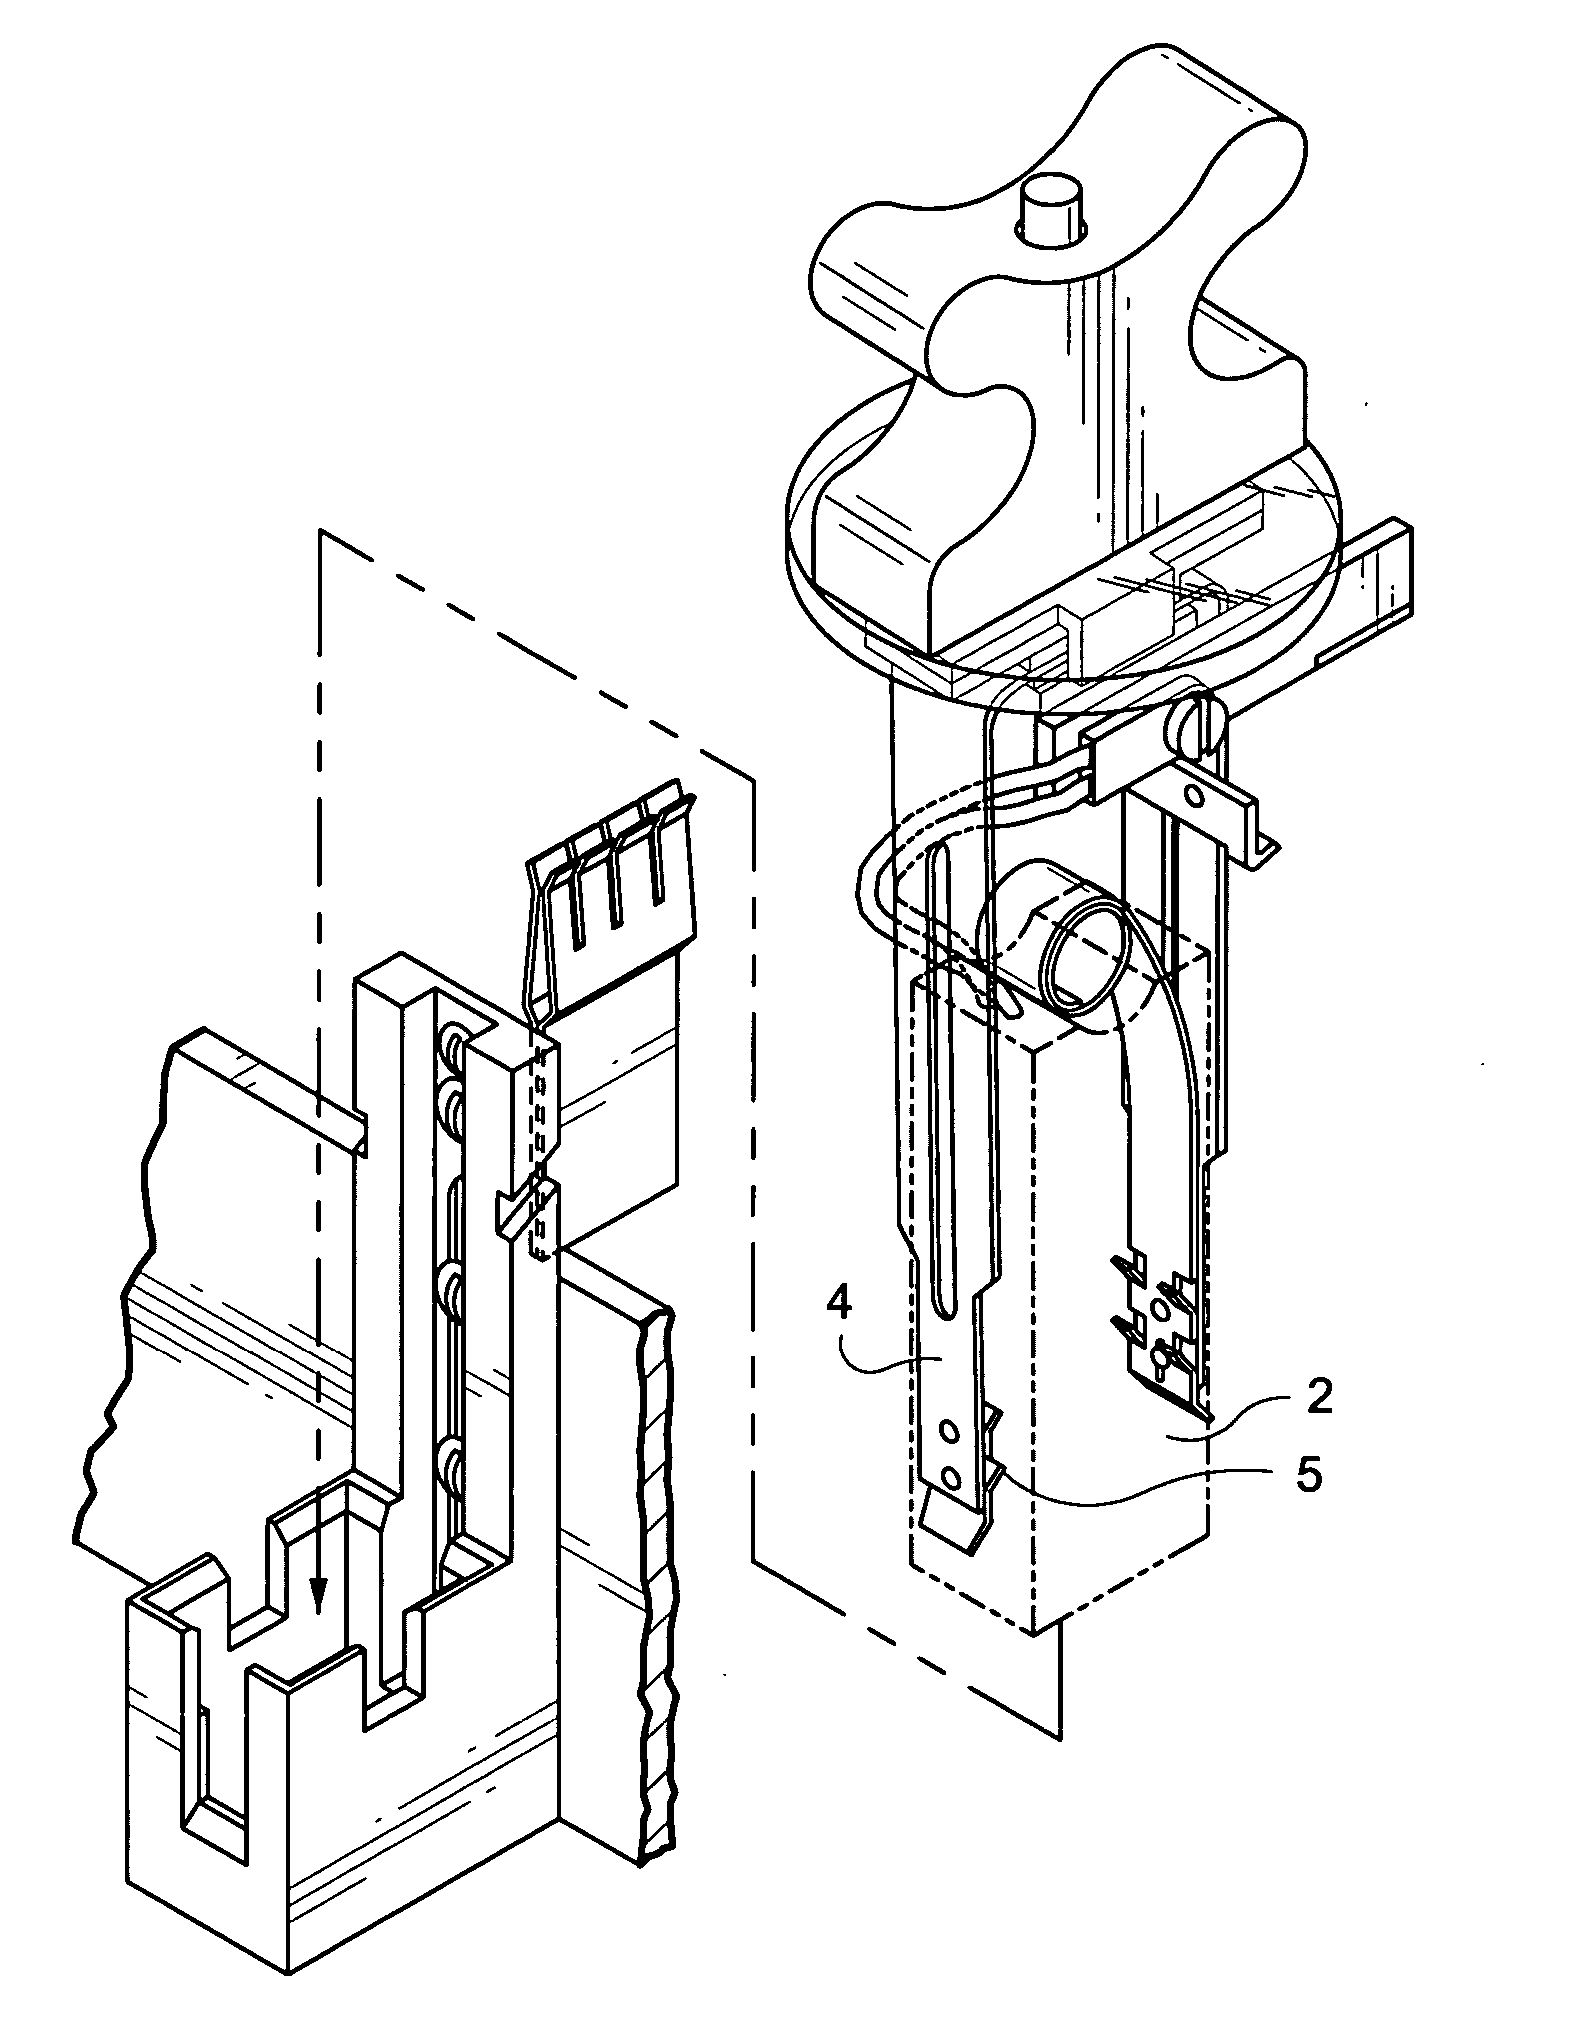 Brush holder assembly for dynamoelectric machines